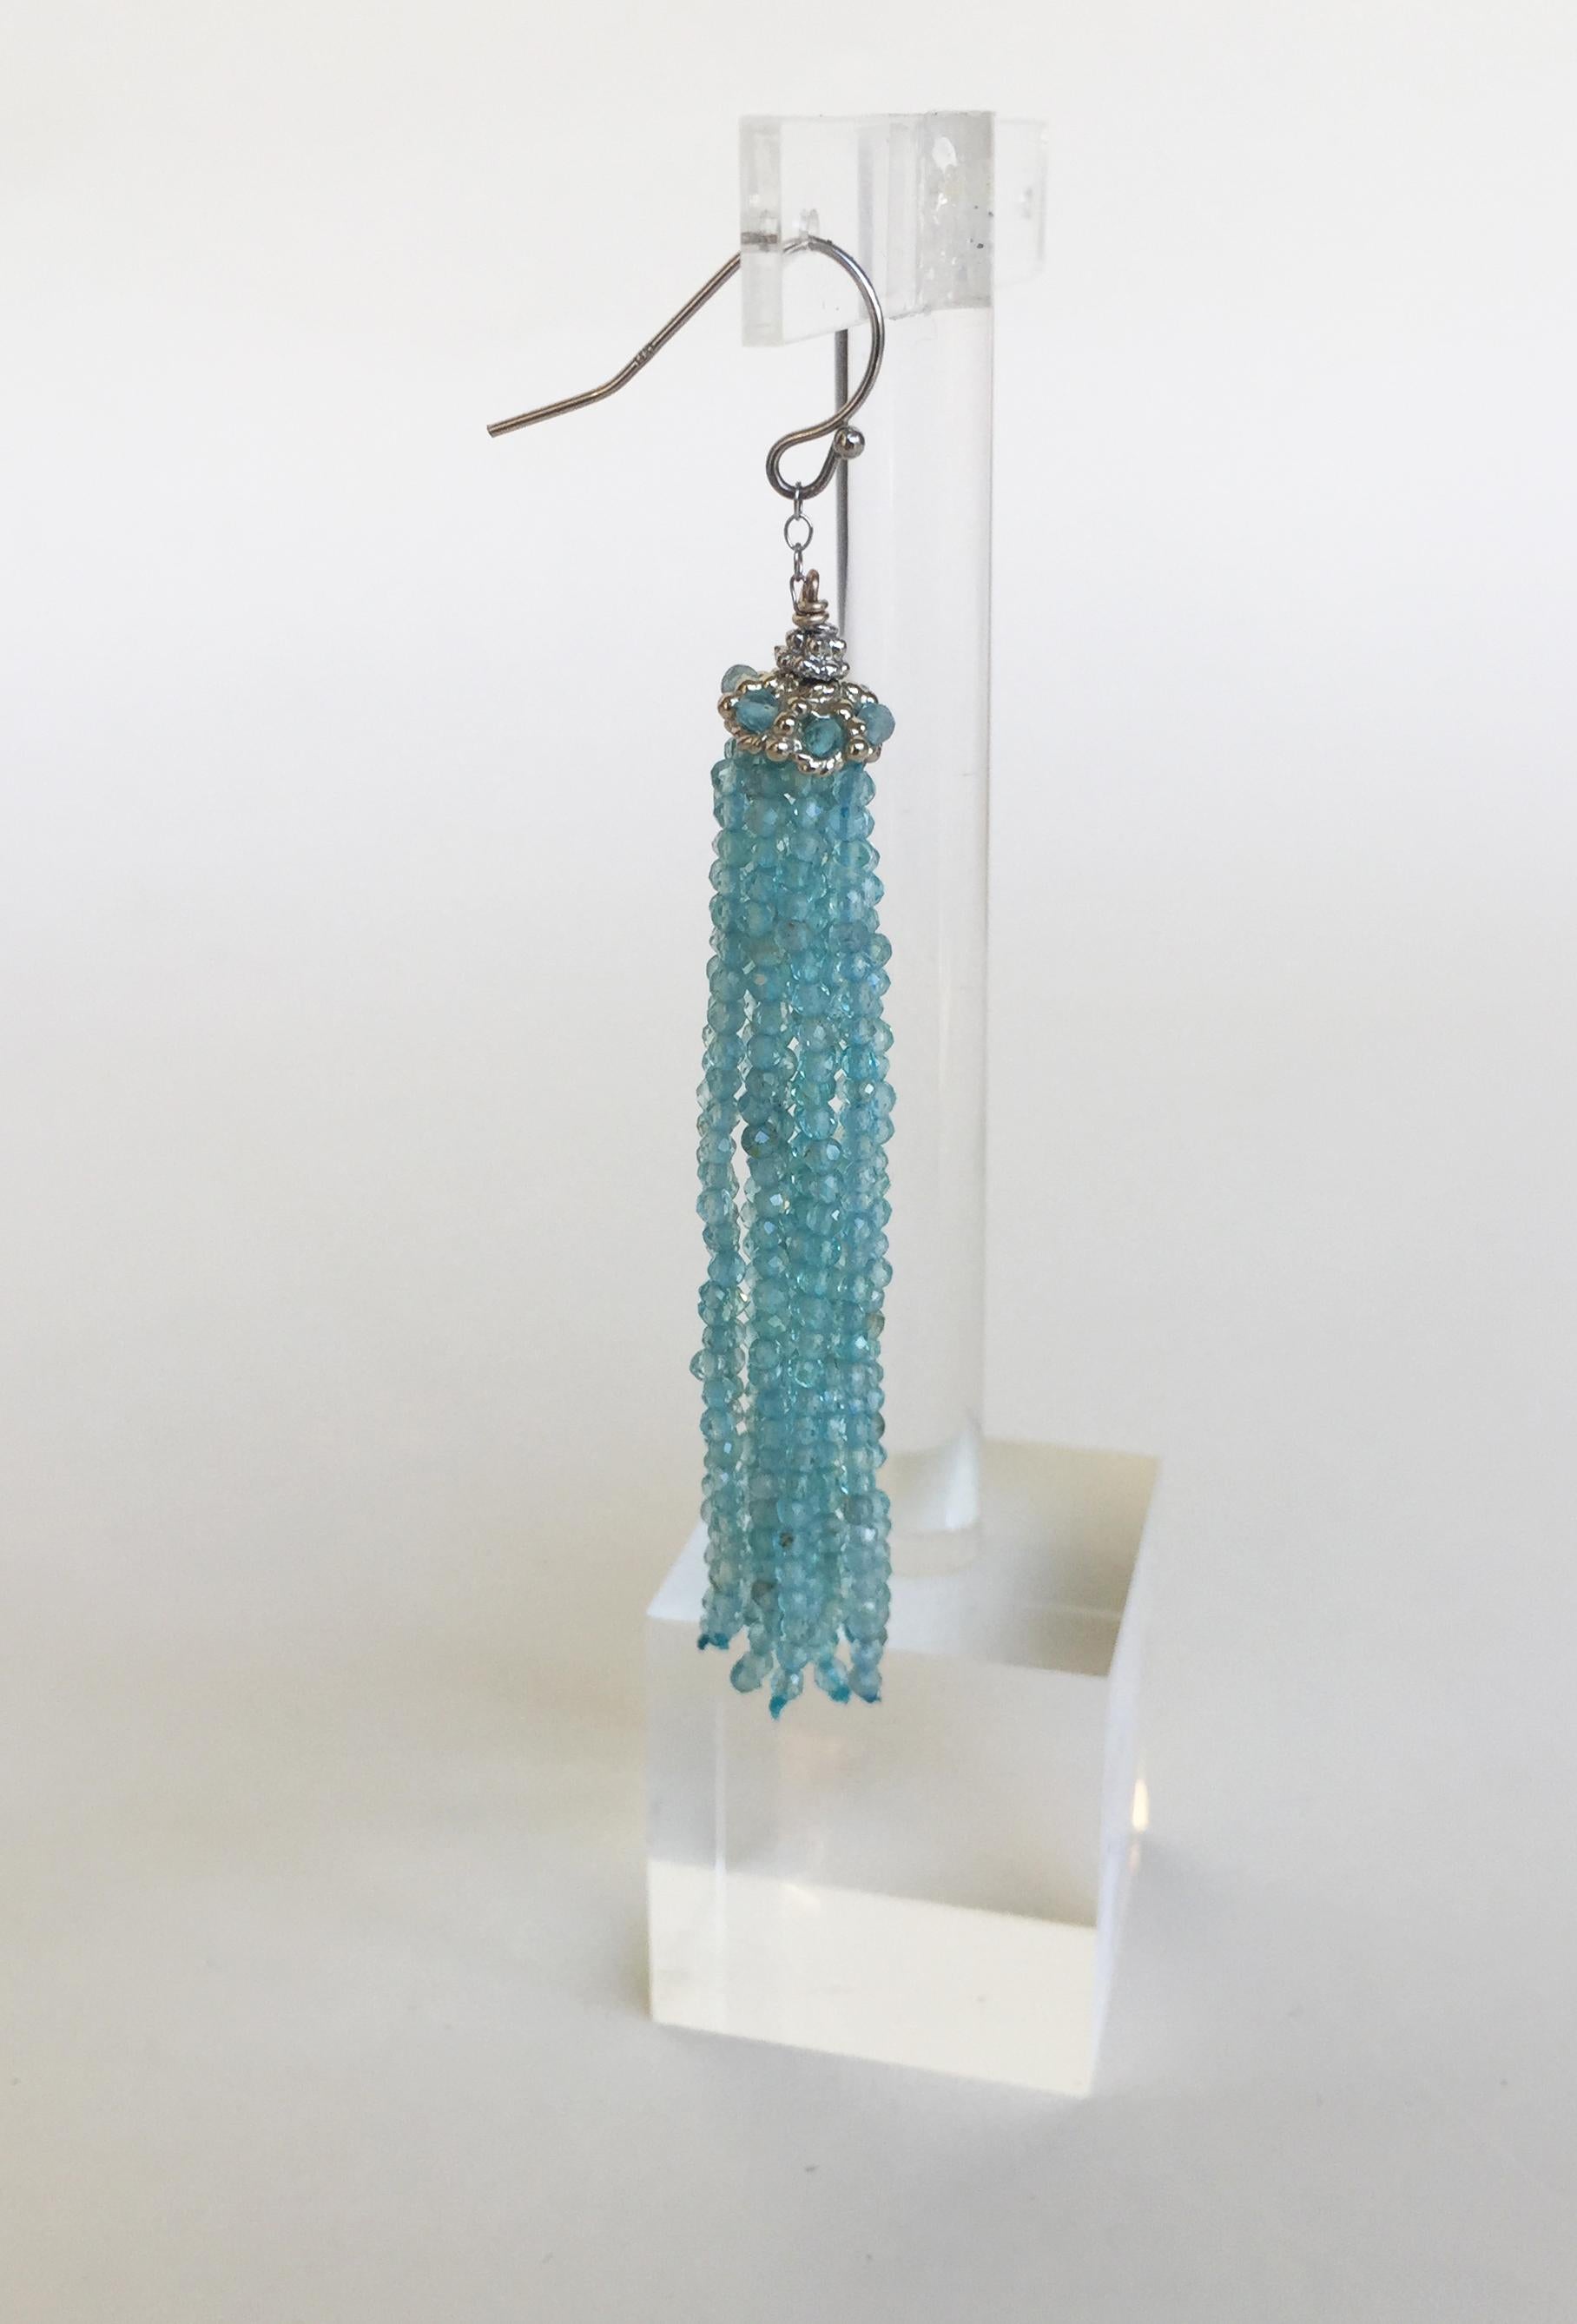 Bead Marina J Faceted Aquamarine Tassel Earrings with 14 K White Gold Chain and Hook